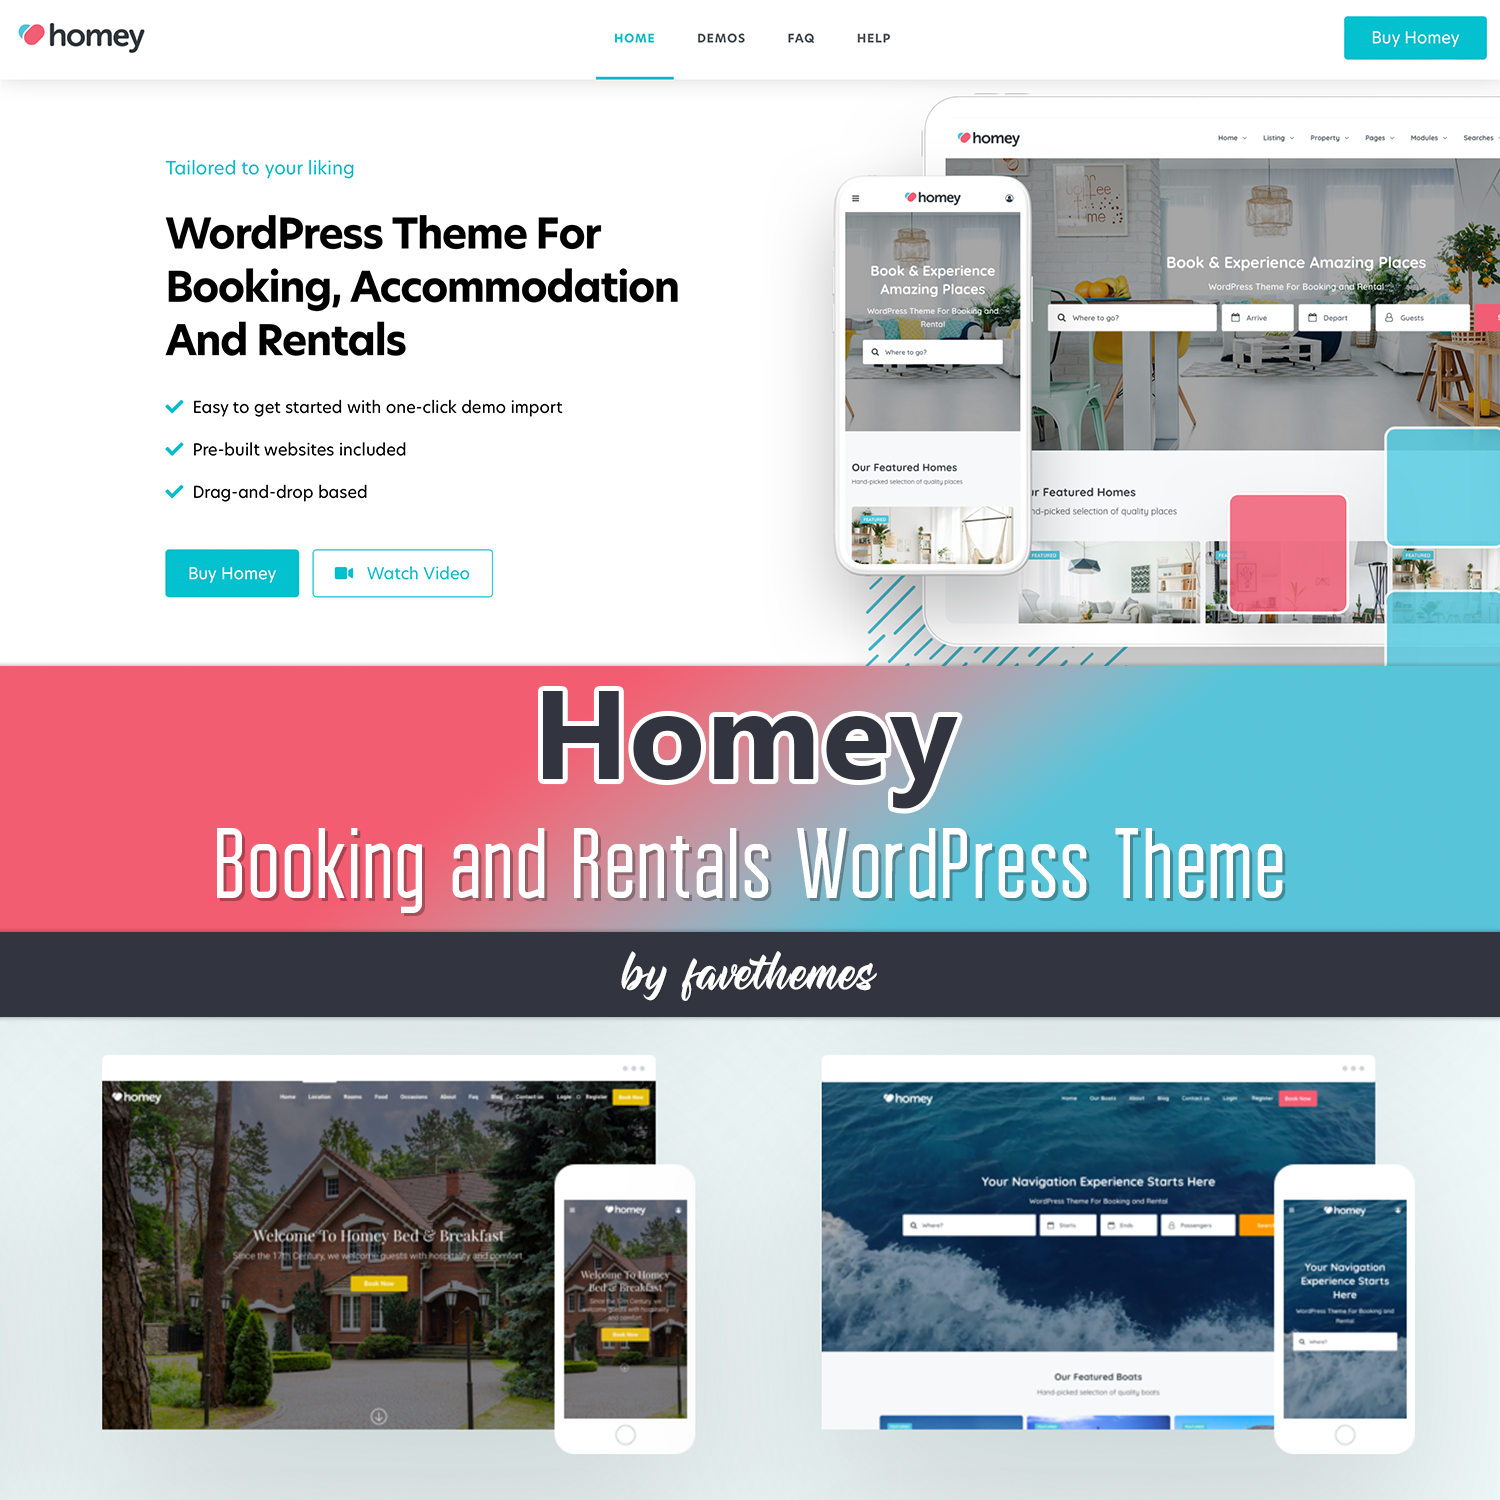 Preview homey booking and rentals wordpress theme.